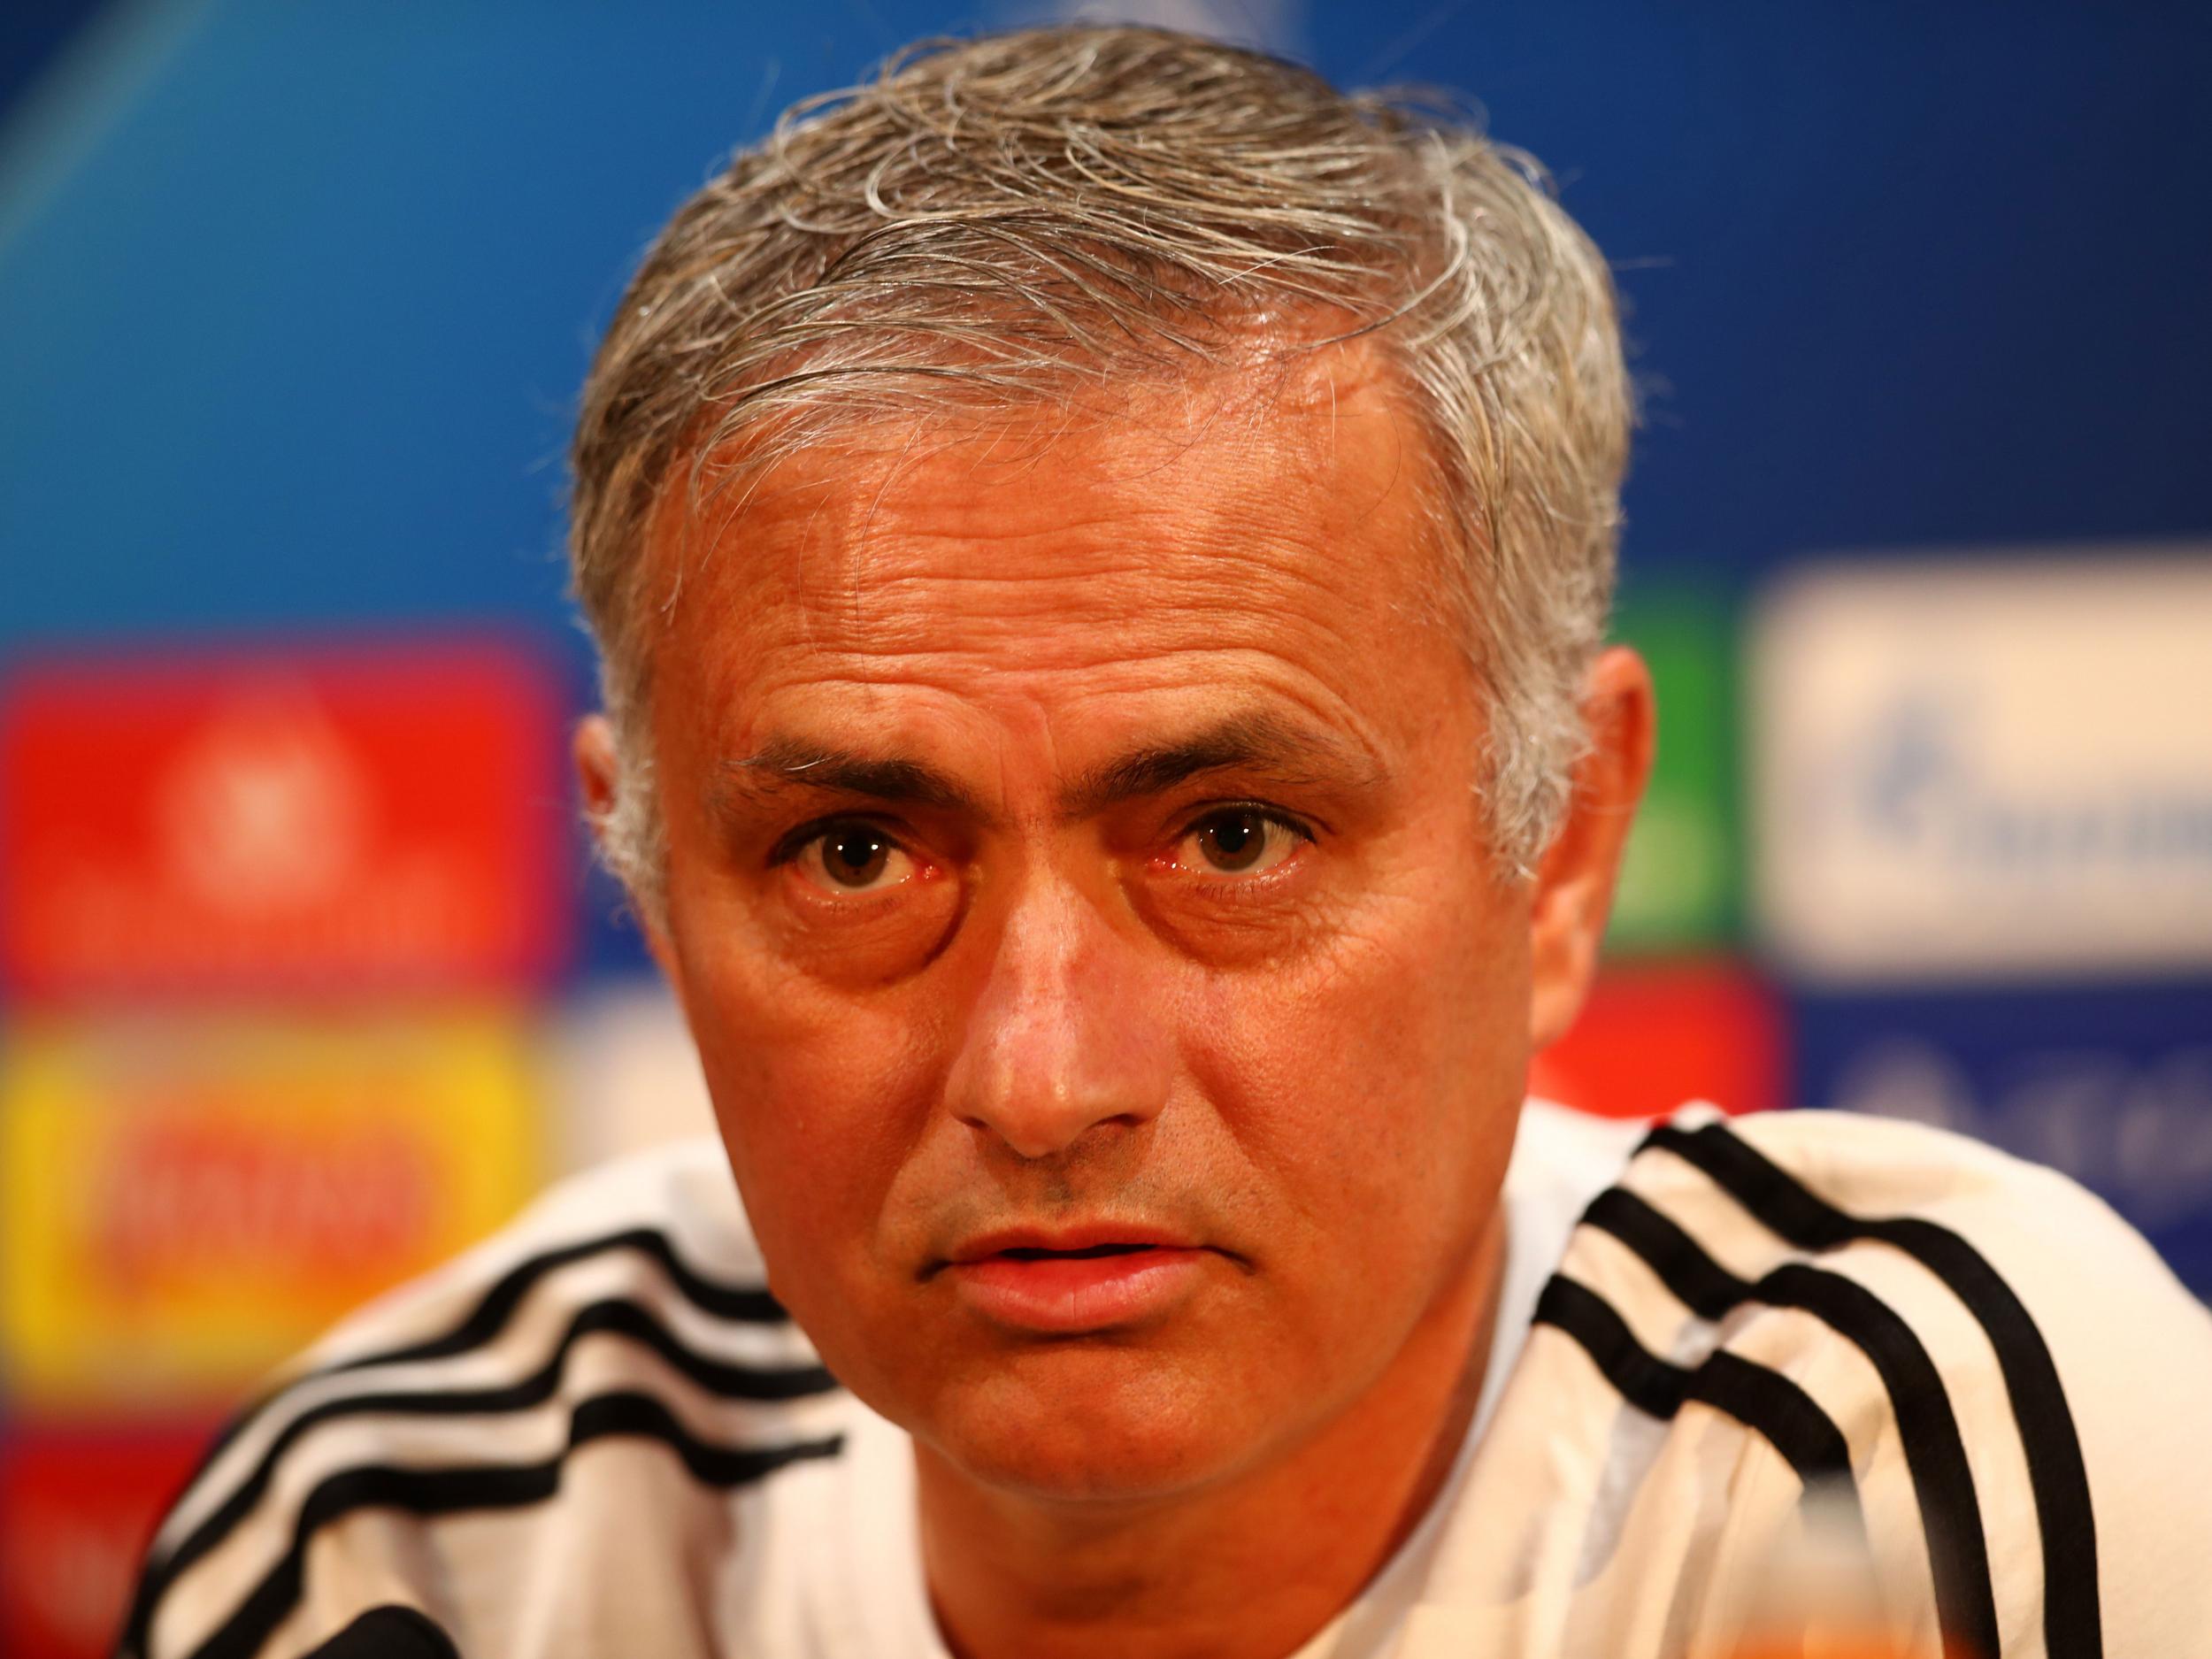 Jose Mourinho press conference LIVE - Build-up to Manchester United vs Juventus, team news, Chelsea reaction